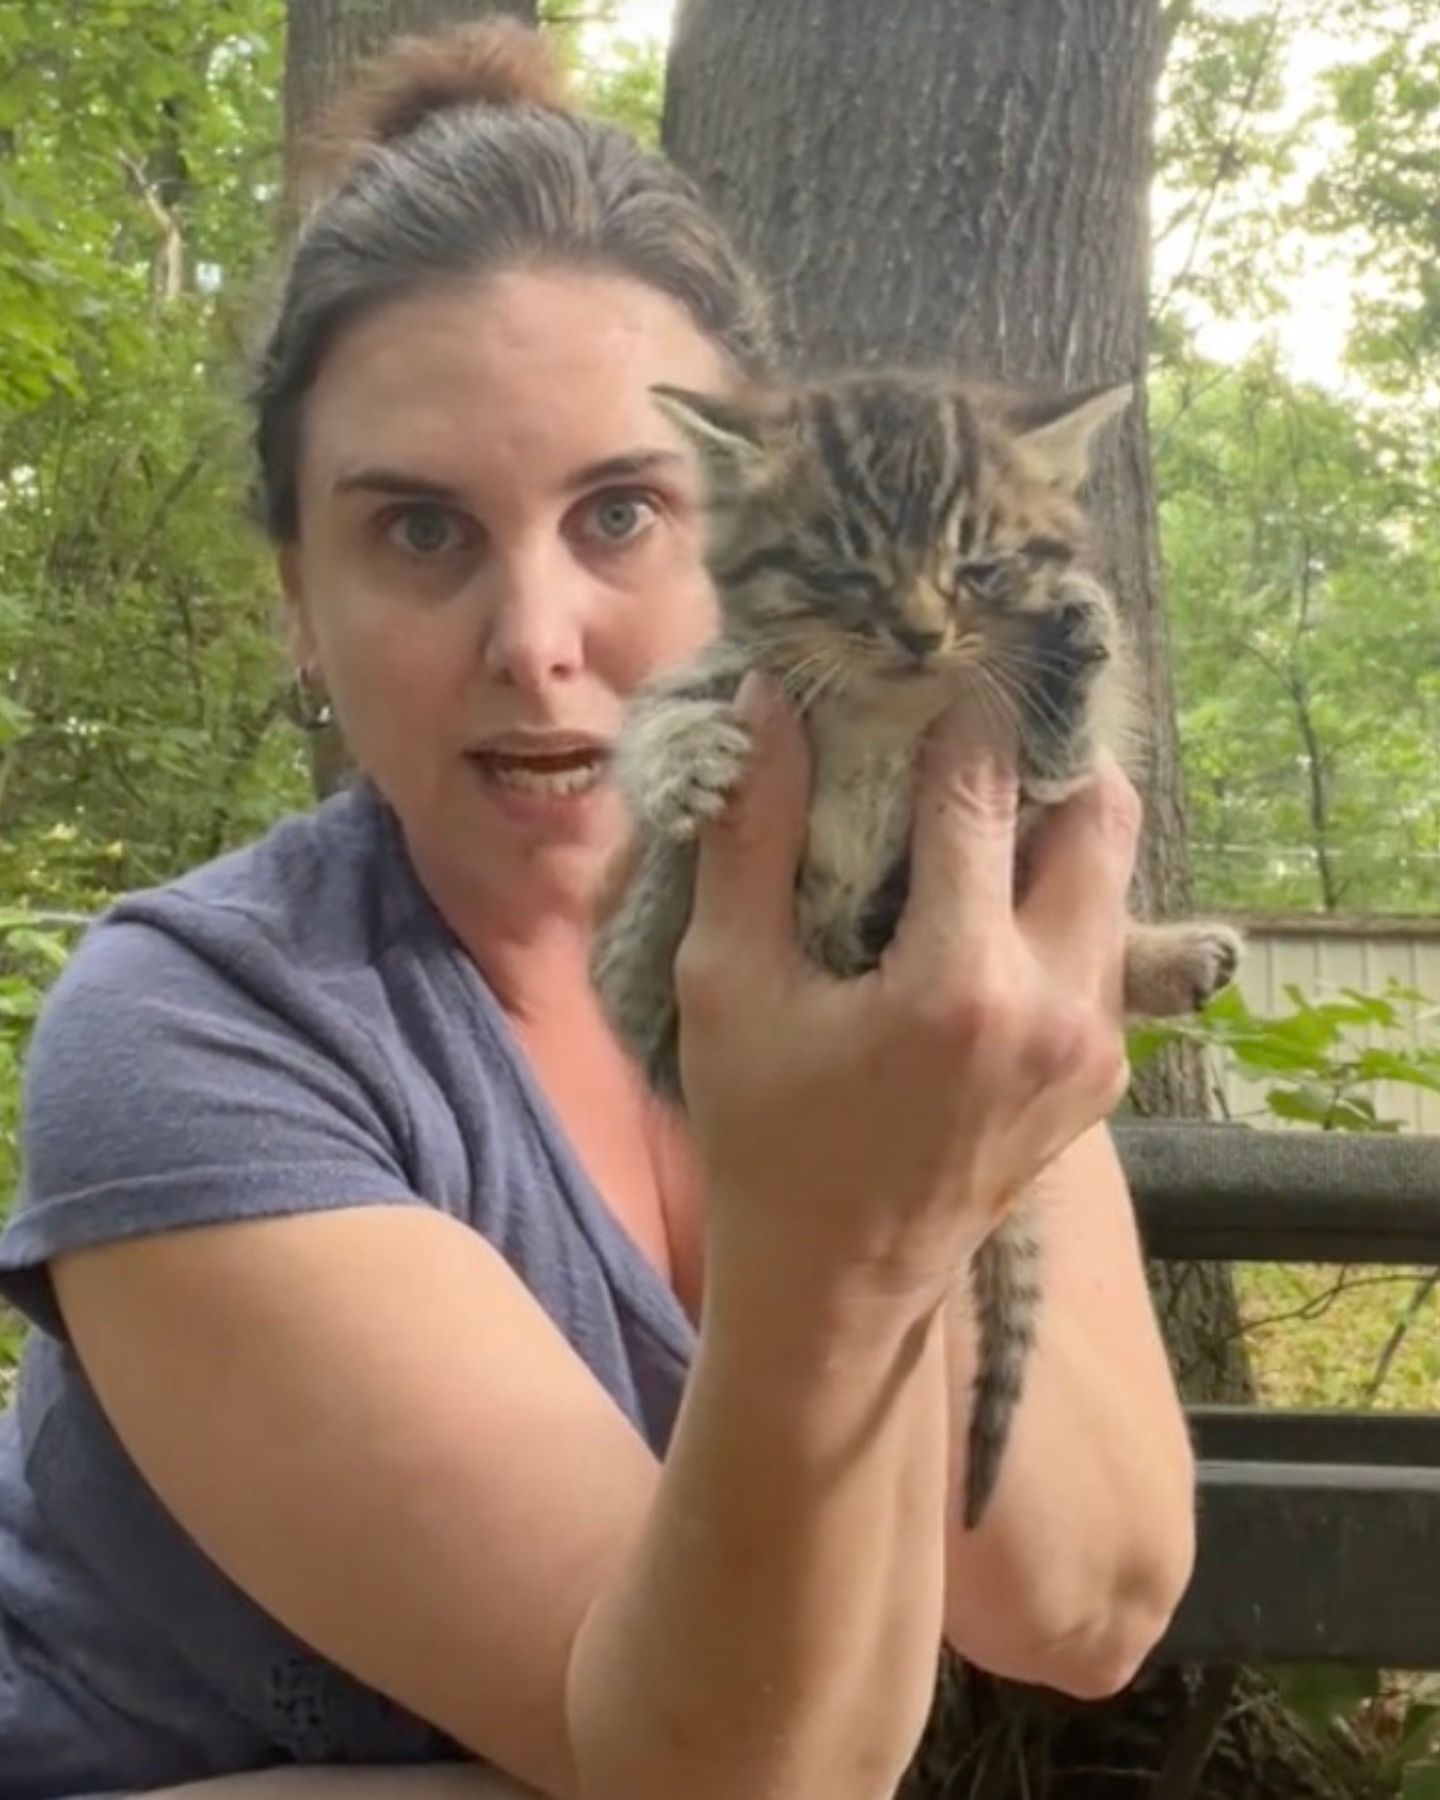 surprised woman holding a cat